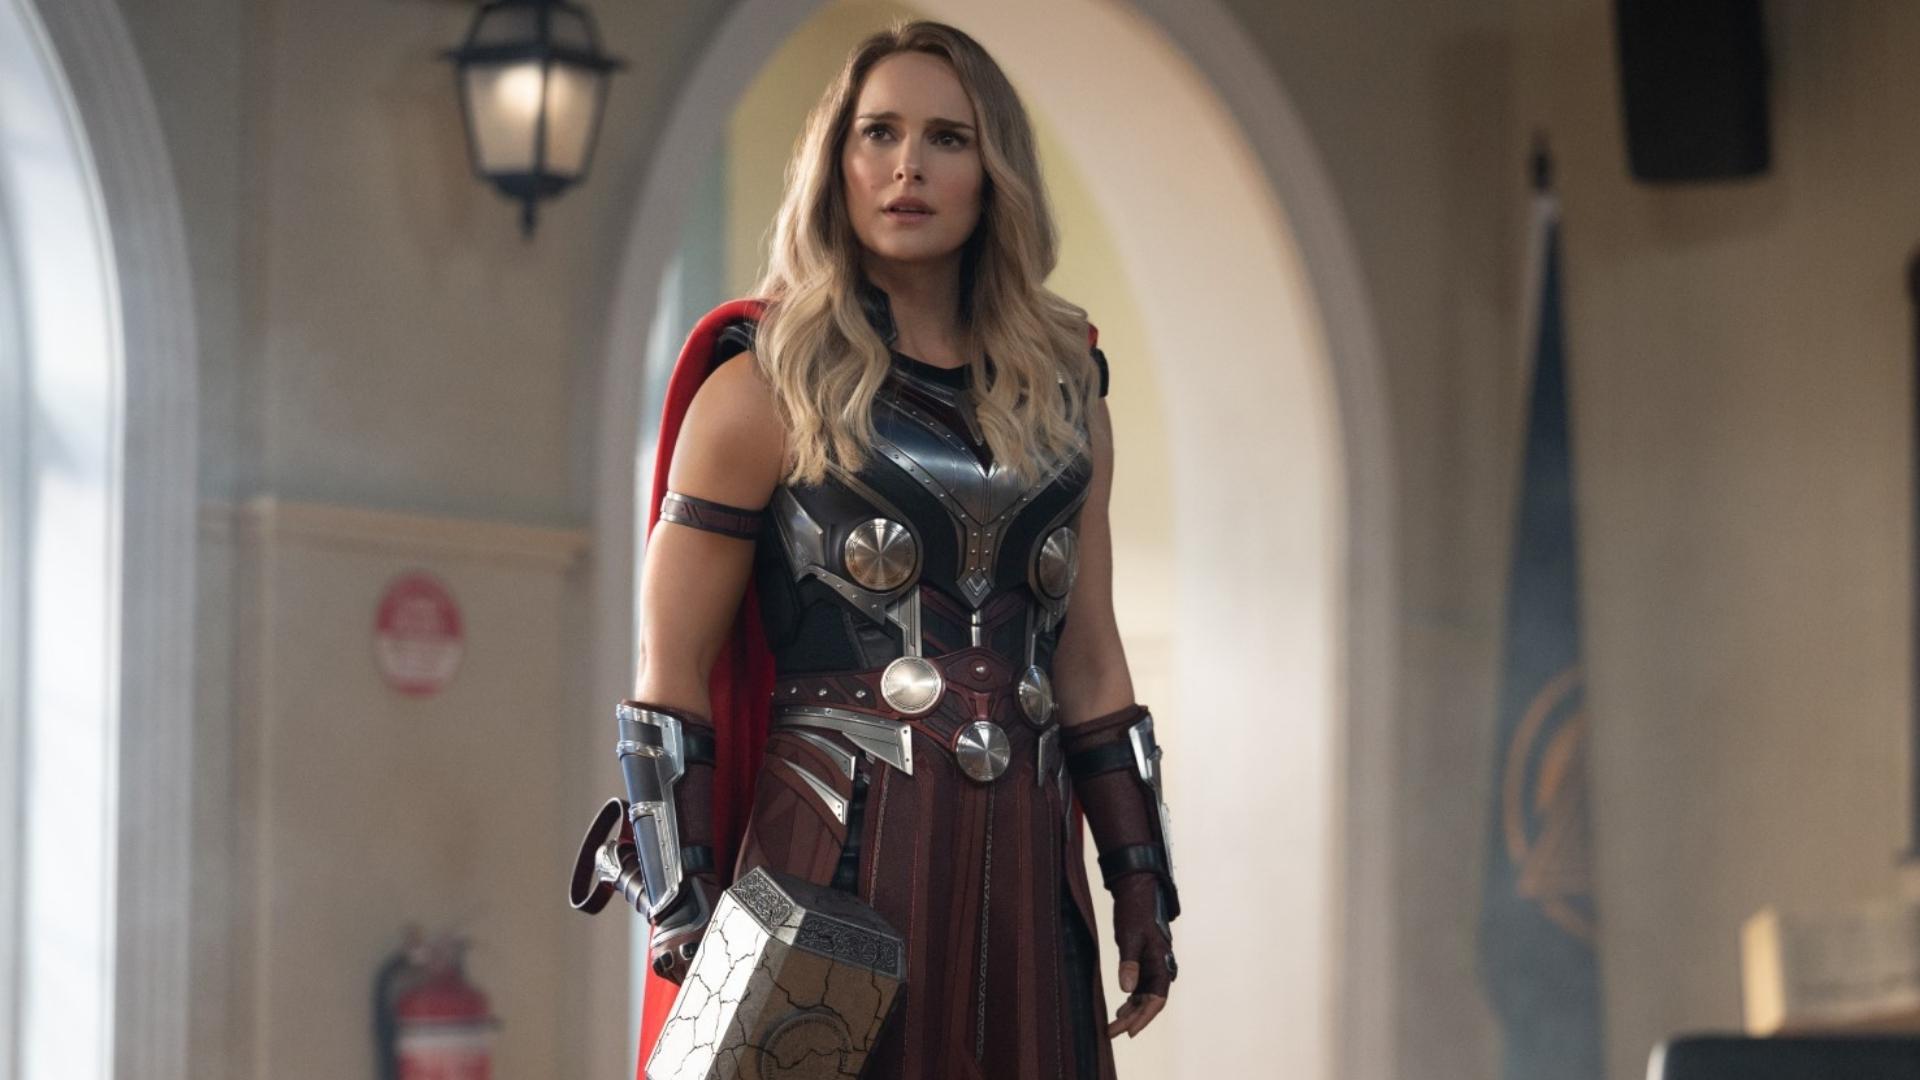 Thor: Did the female characters survive the cut scenes in the editing?